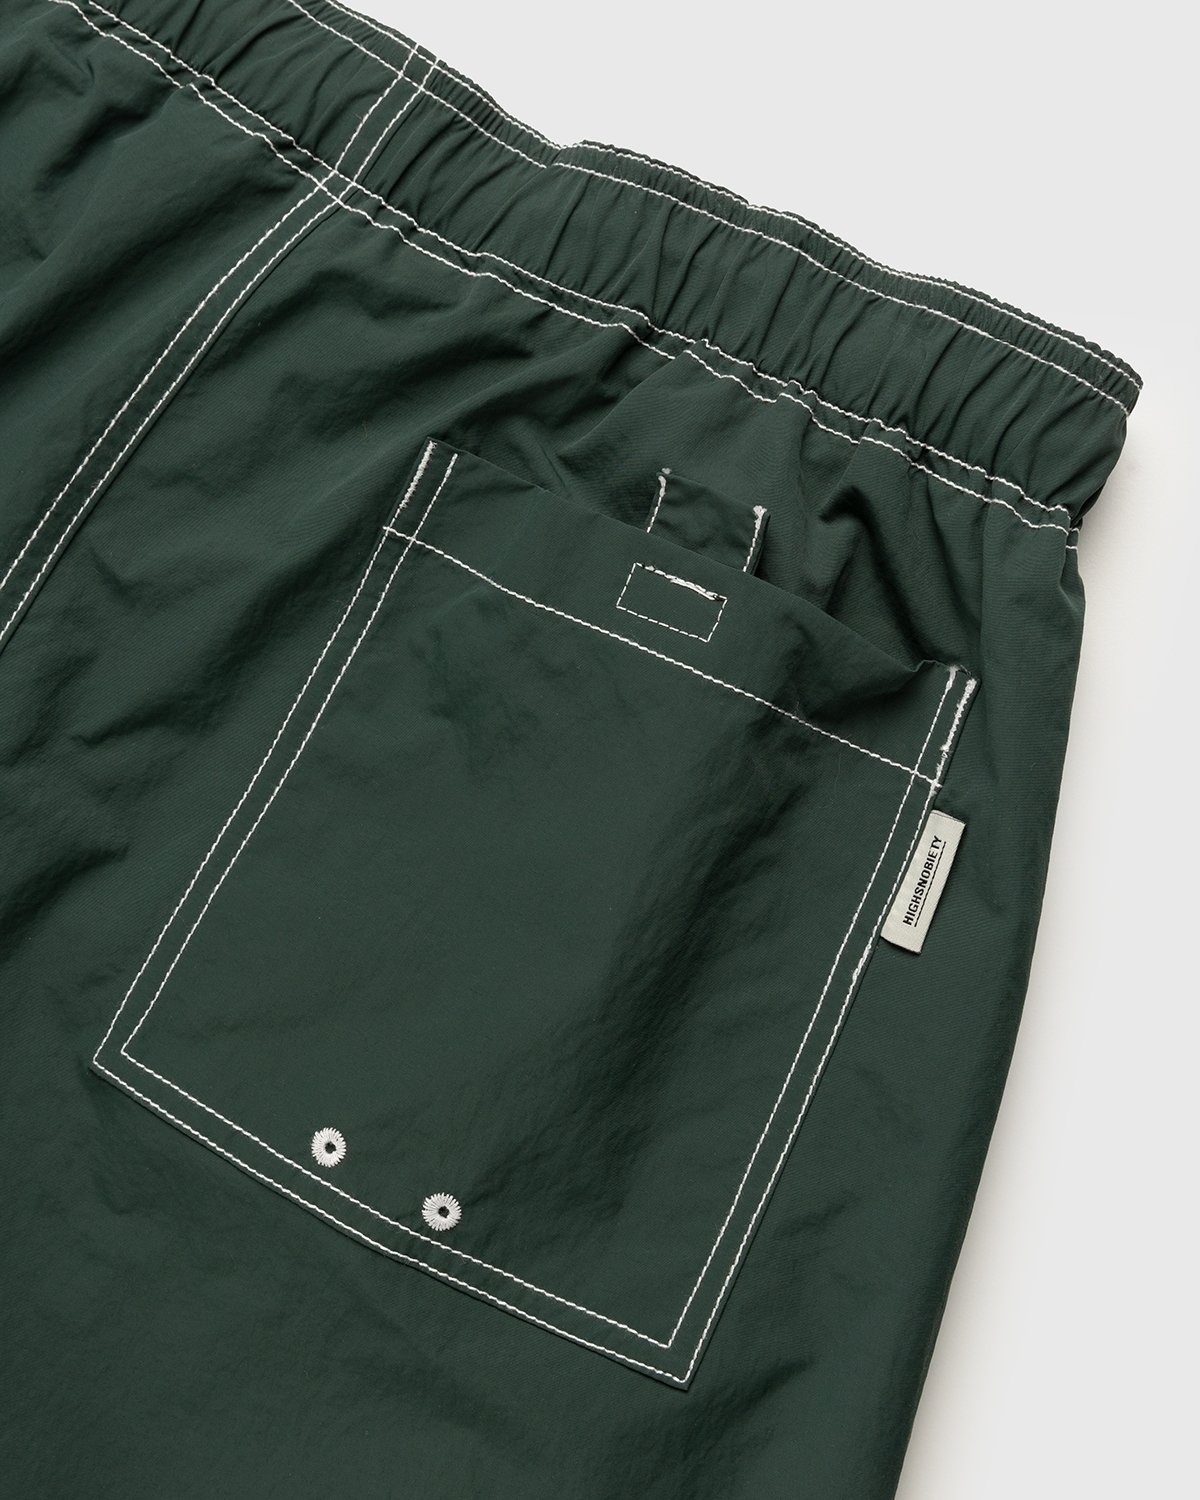 Highsnobiety – Contrast Brushed Nylon Water Shorts Green - Active Shorts - Green - Image 4